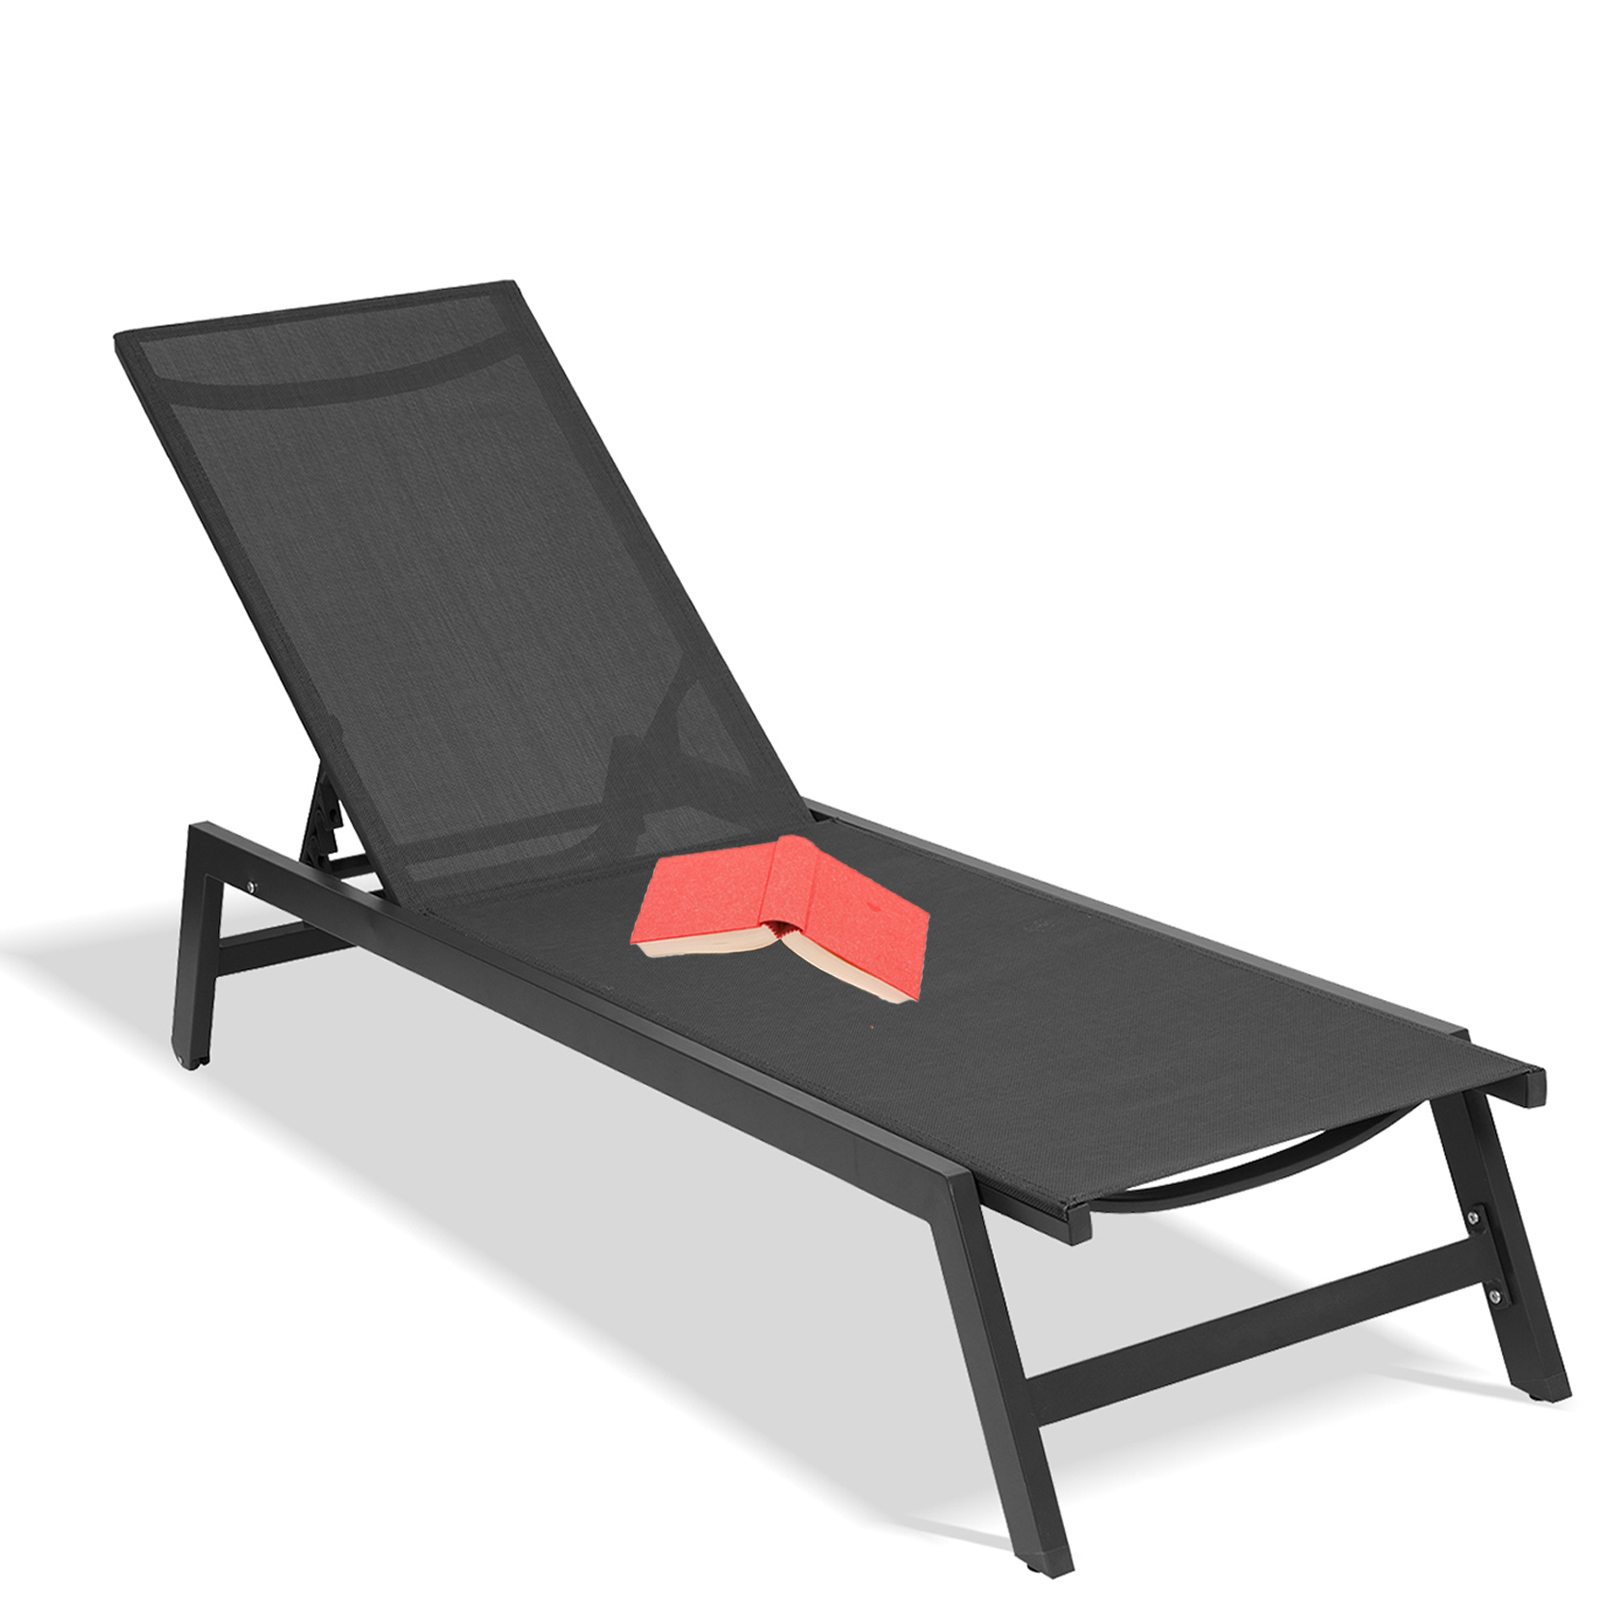 Seizeen Outdoor Chaise Lounge Chair, Five-Position Adjustable Patio Lounge Chair for Poolside Deck Porch Backyard, Black Aluminum Frame Furniture Set with Wheels - image 1 of 11